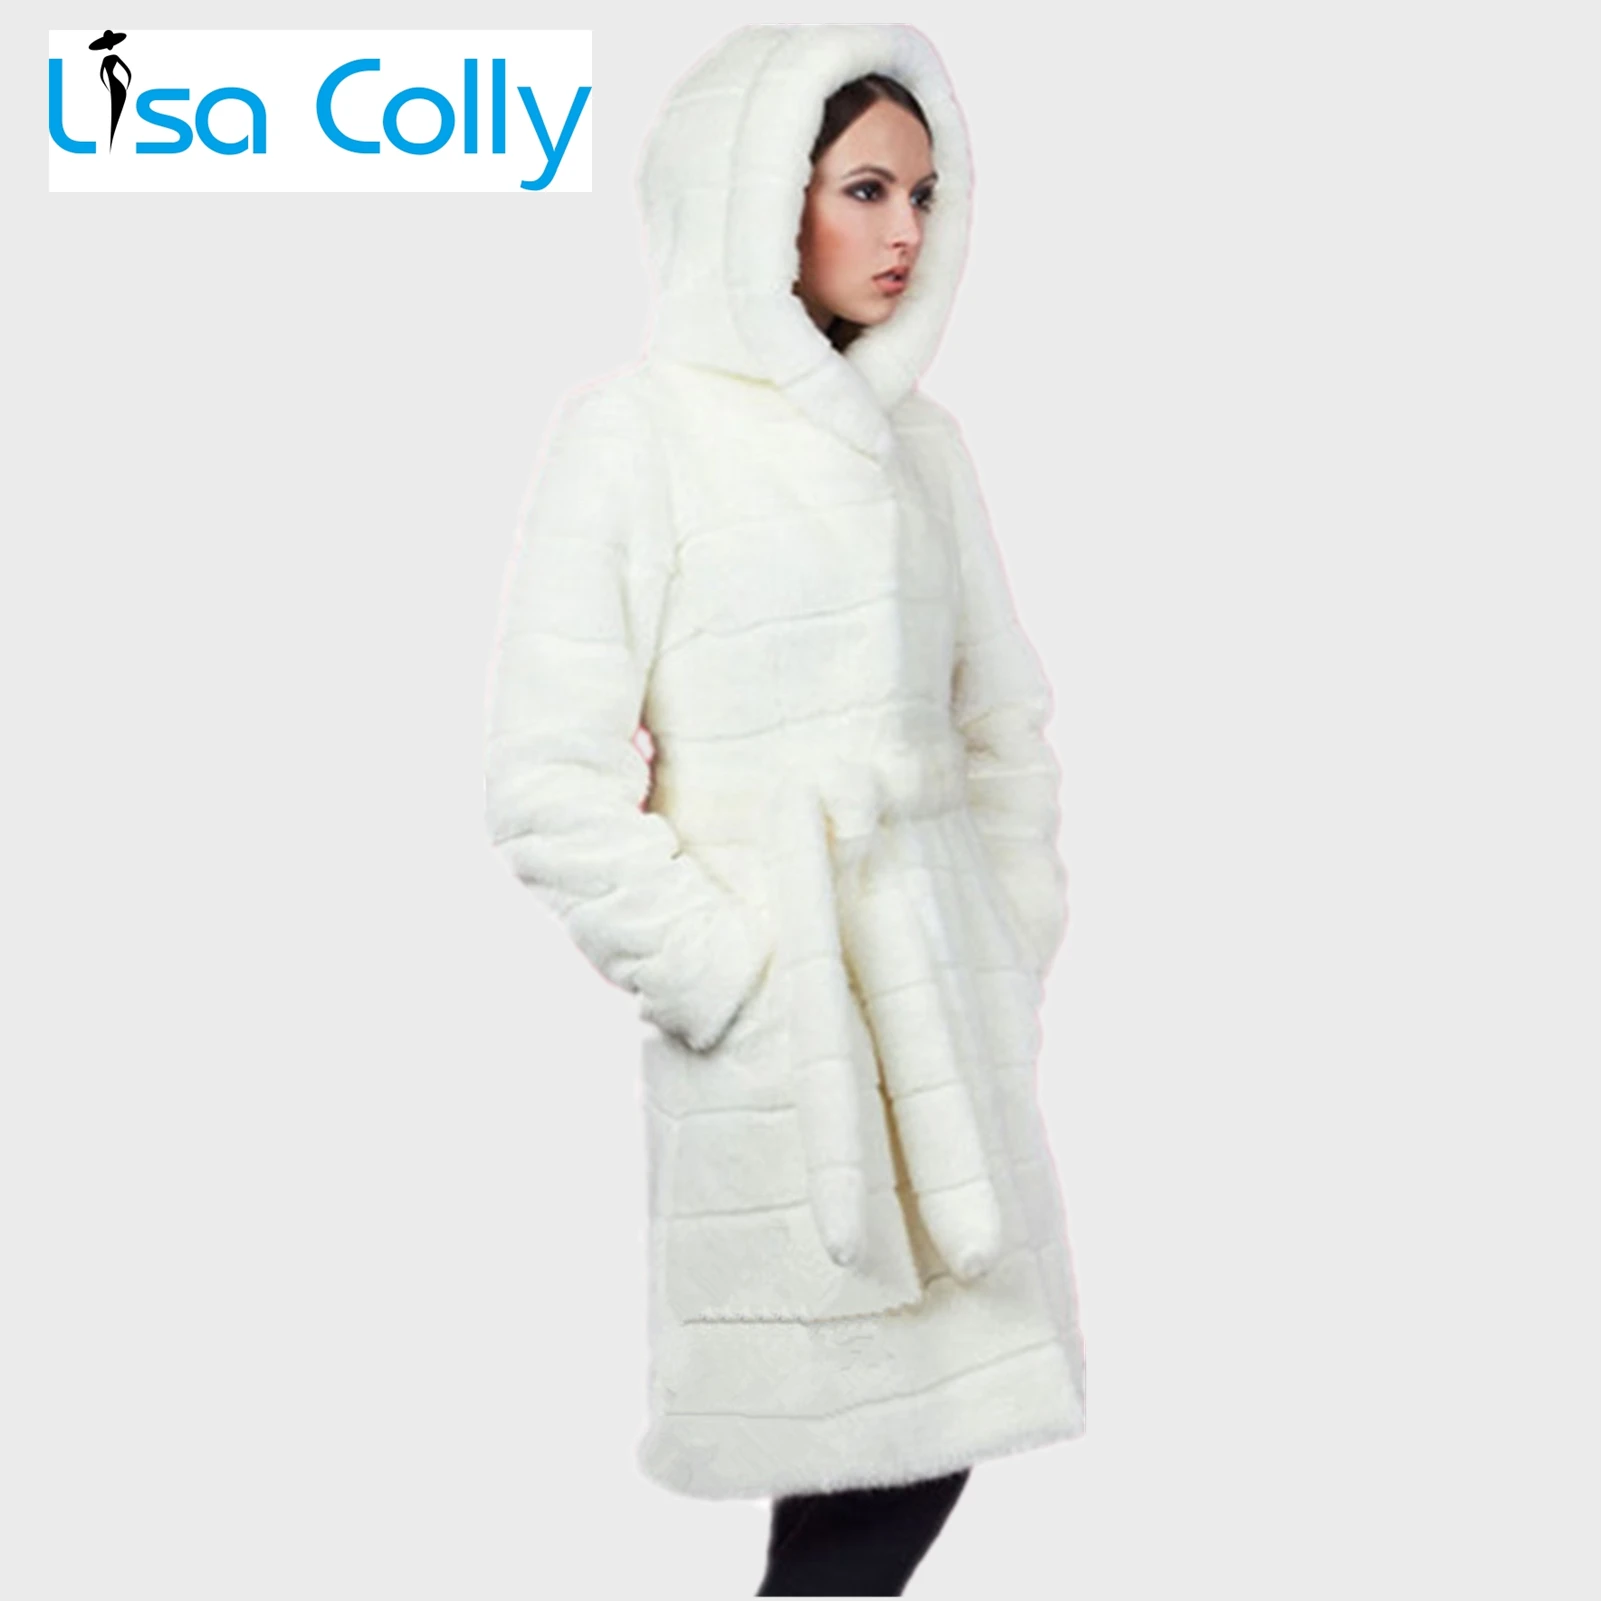 

Lisa Colly New Women White Faux Fur Coat Warm Outwear Casual Winter Long Faux Mink Jacket Coats With Hooded